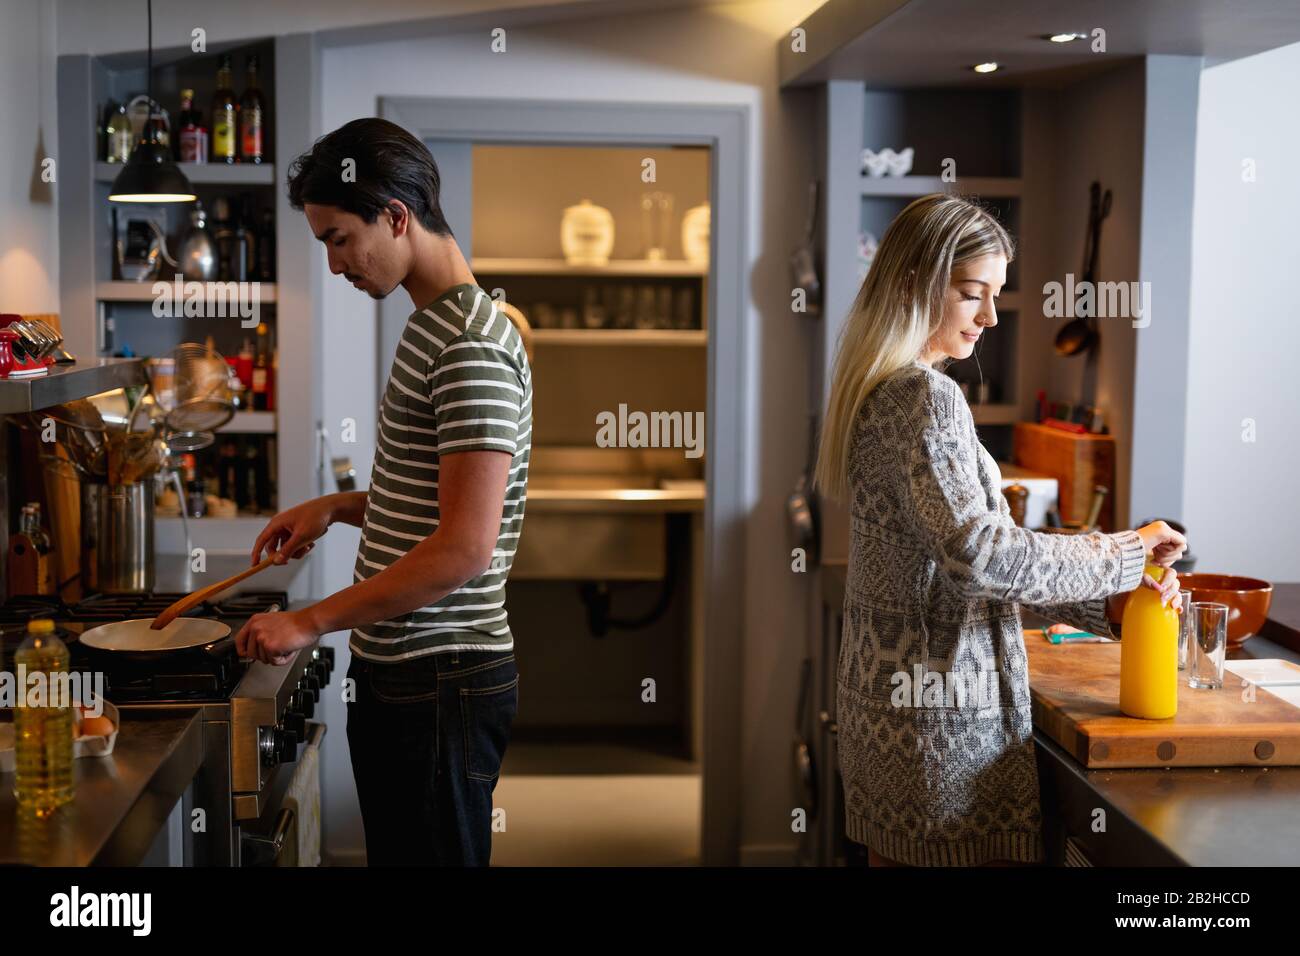 Jeune couple cooking together at home Banque D'Images